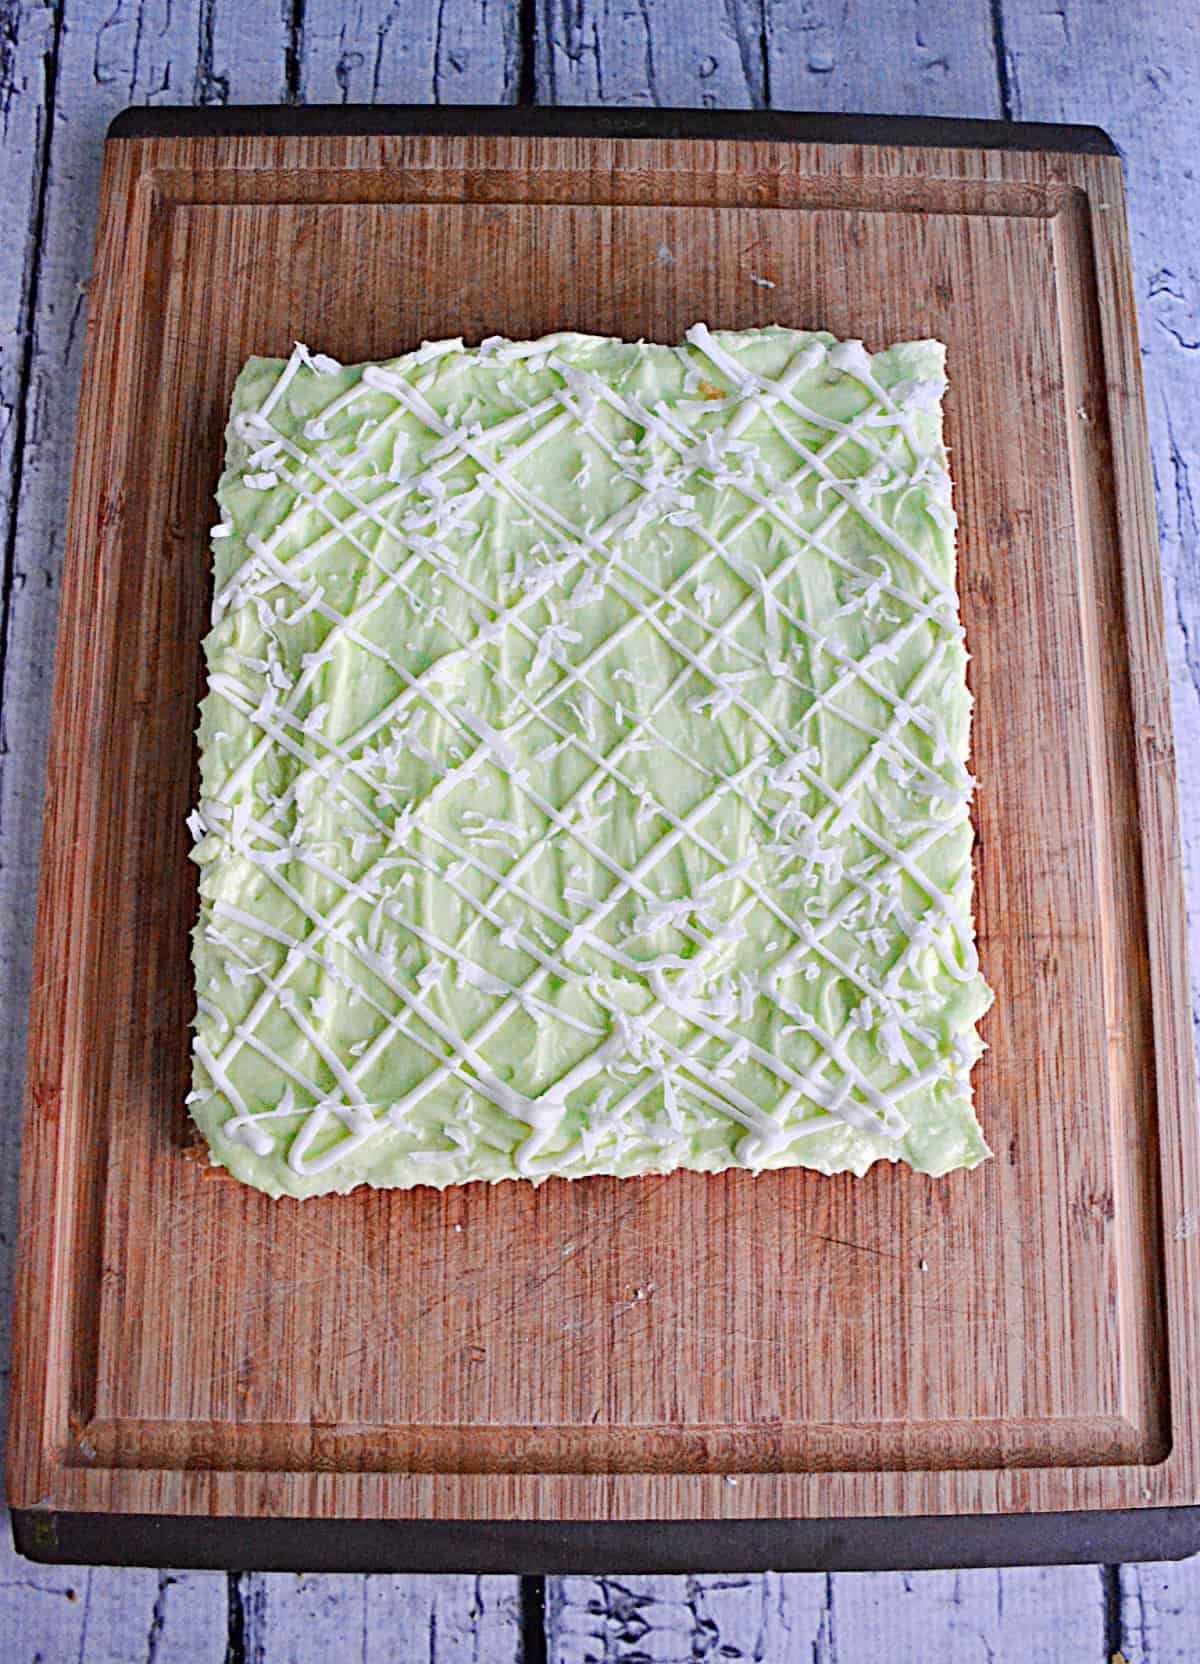 Cookie bars frosted with lime frosting and a white chocolate drizzle.